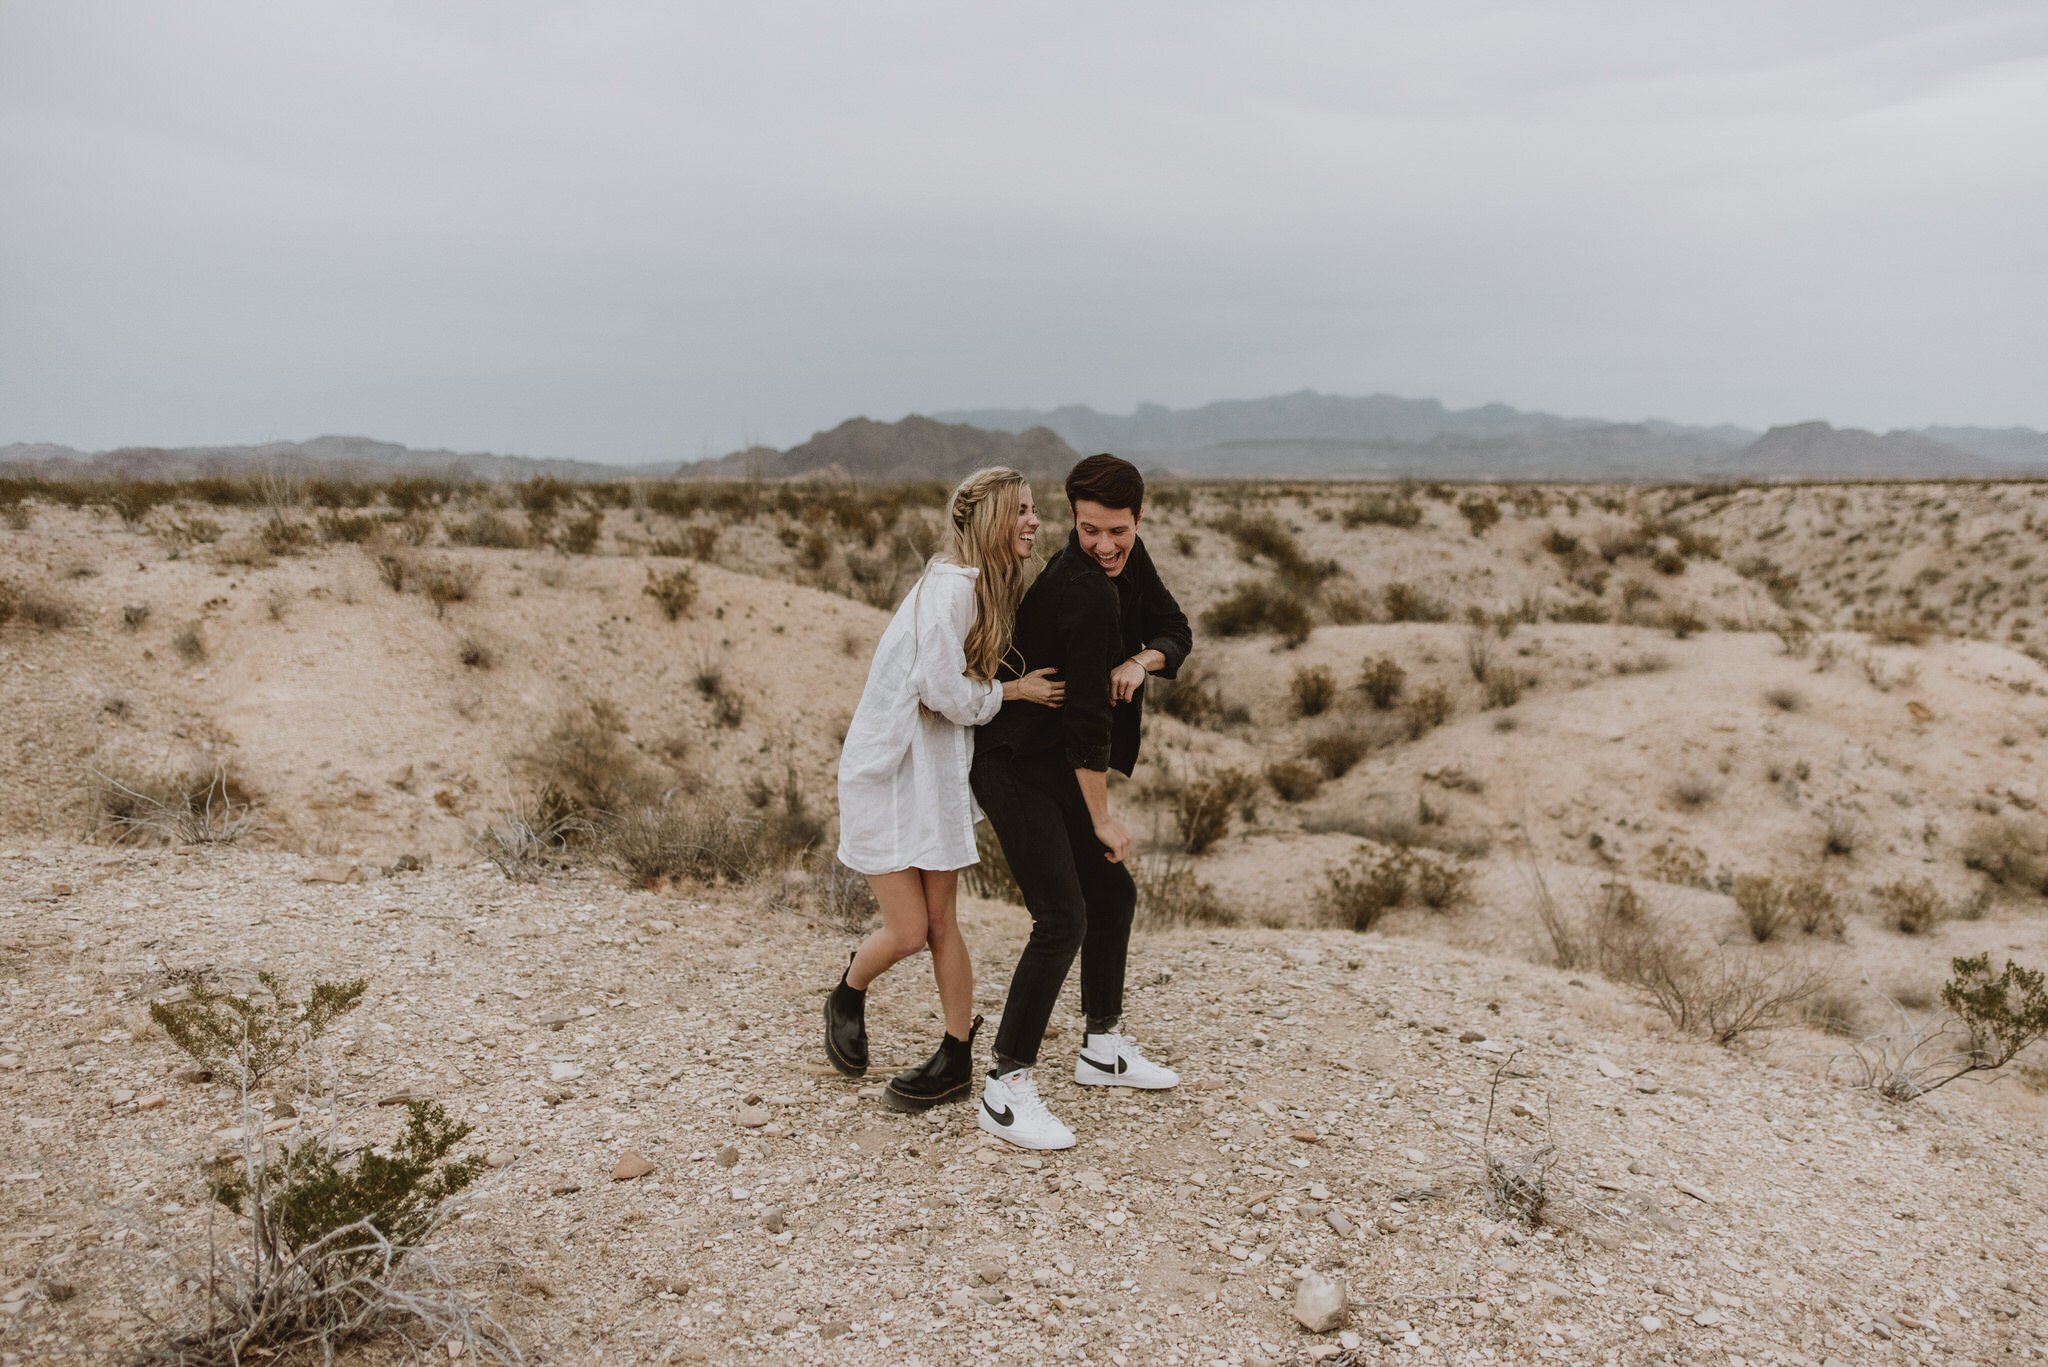 Kaylie-Sirek-Photography-Big-Bend-National-Park-Texas-Engagement-Session-Styled-You-047.jpg